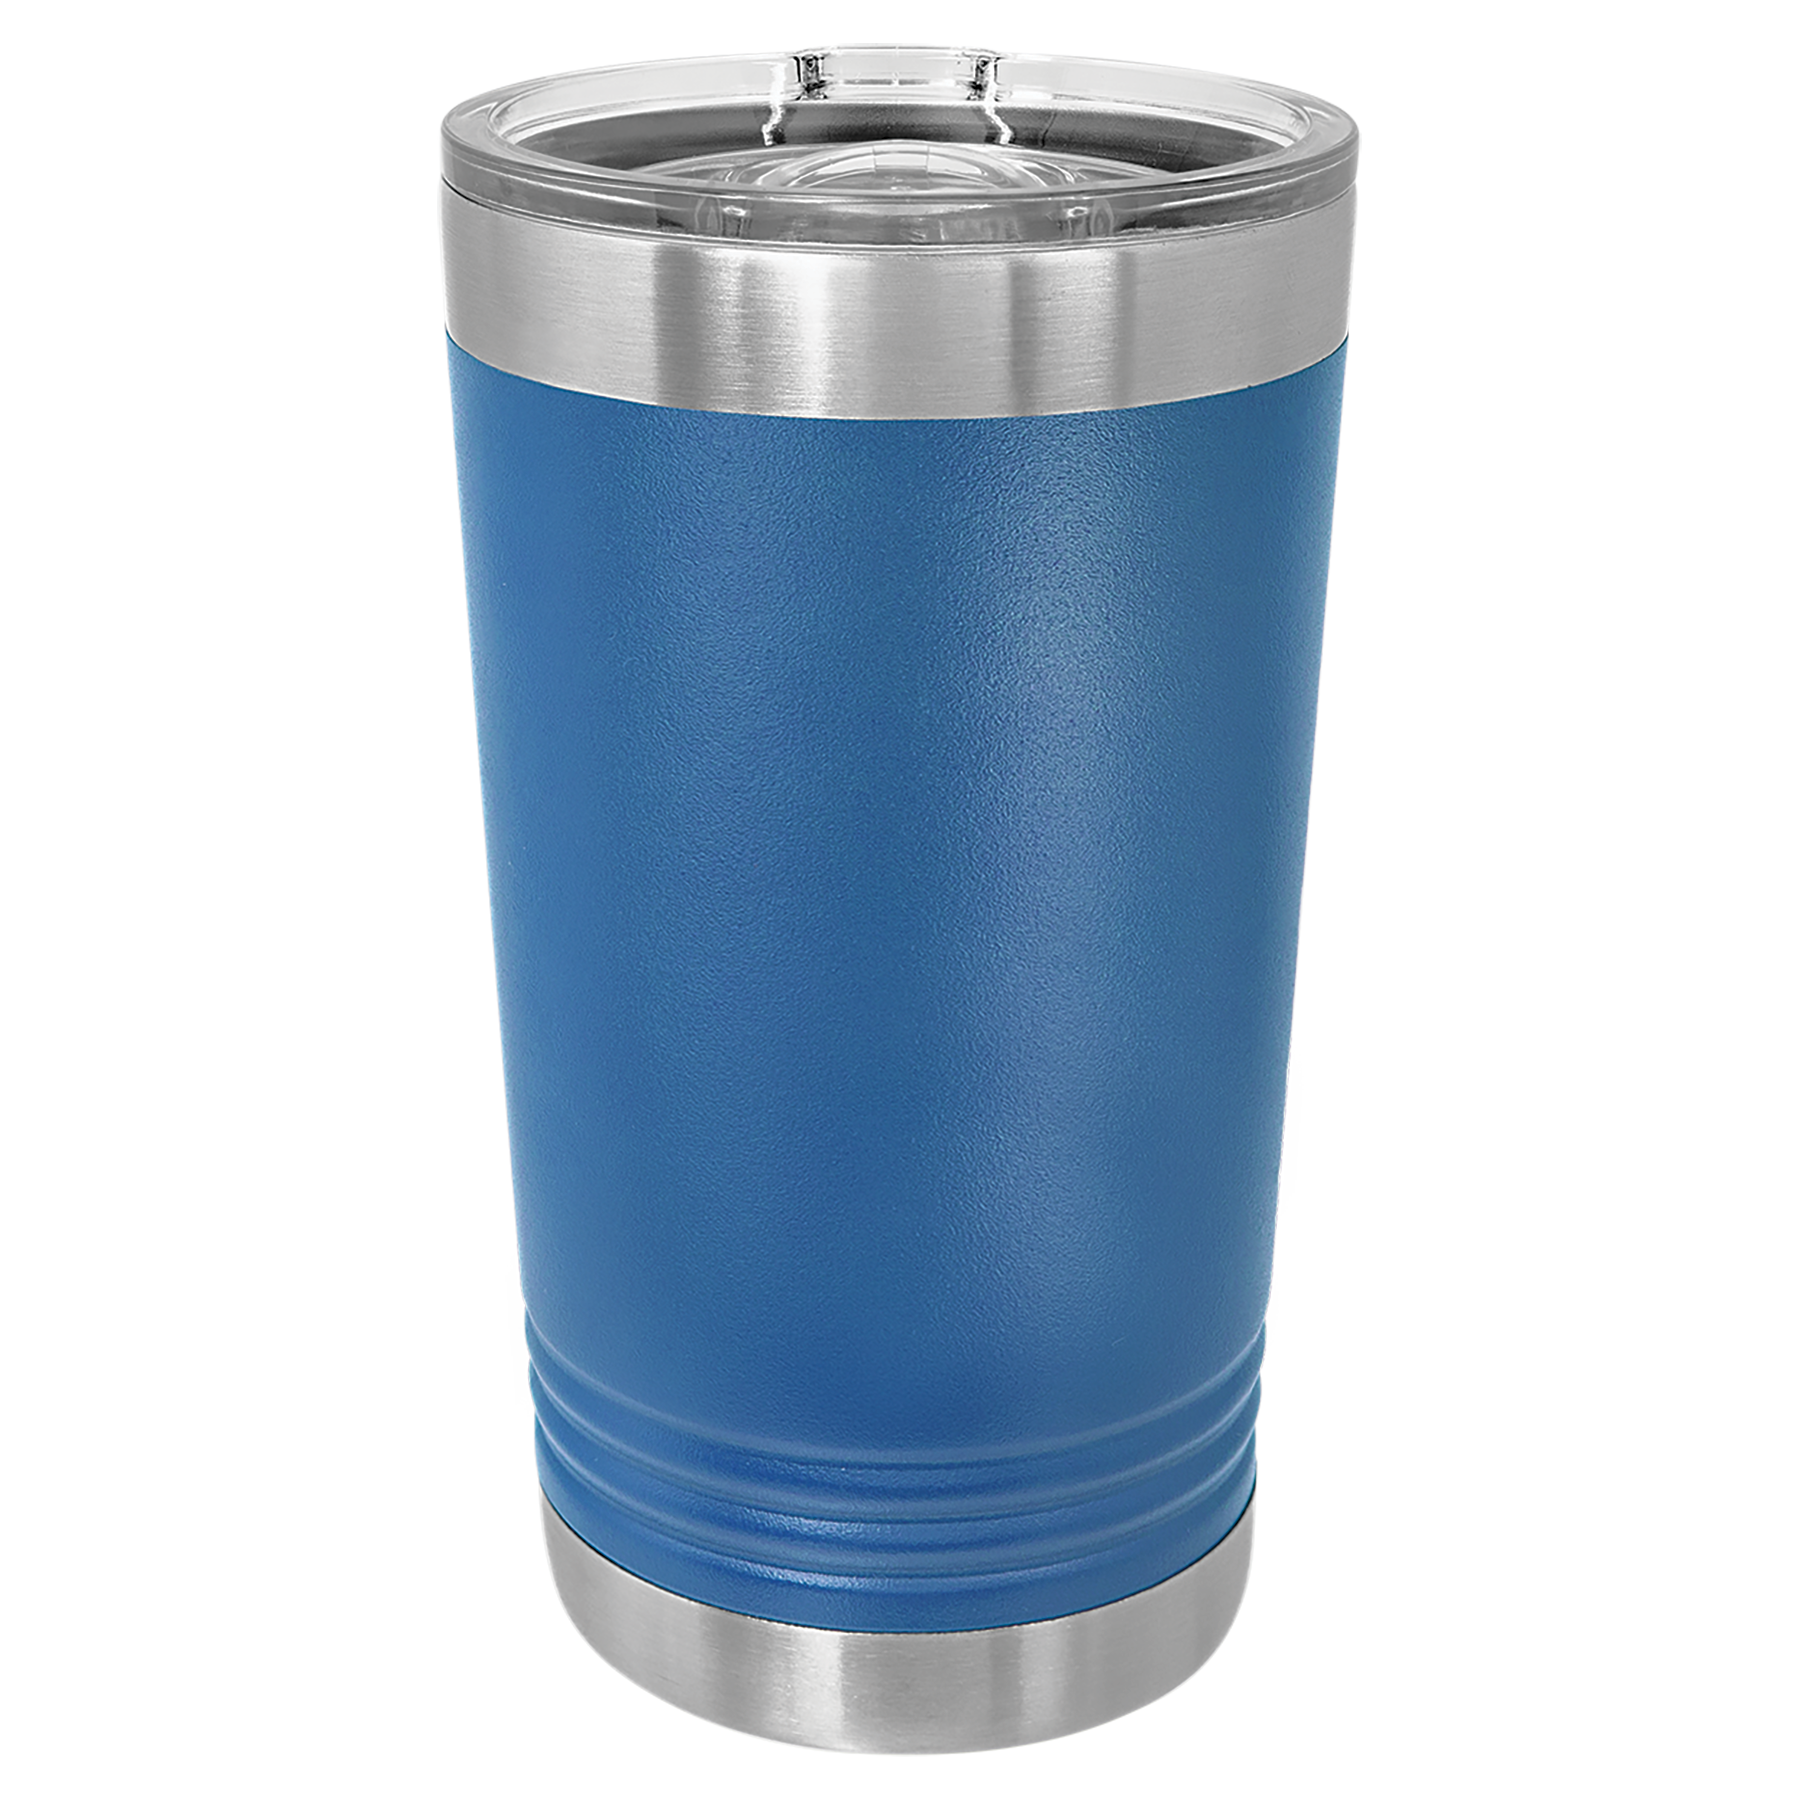 Royal Blue 16oz Pint Tumbler -One Free Engraving  -Fits most Cup Holders  -Double-wall Vacuum Insulated  -Made from 18/8 Gauge Stainless Steel (Type 304 Food Grade)  -Lid is BPA Free (Hand Wash Only)  -Not recommended for Dishwasher  -Works with Cold and Hot Drinks  -18 Color Options  -Perfect for Personalized Gifts, Awards, In